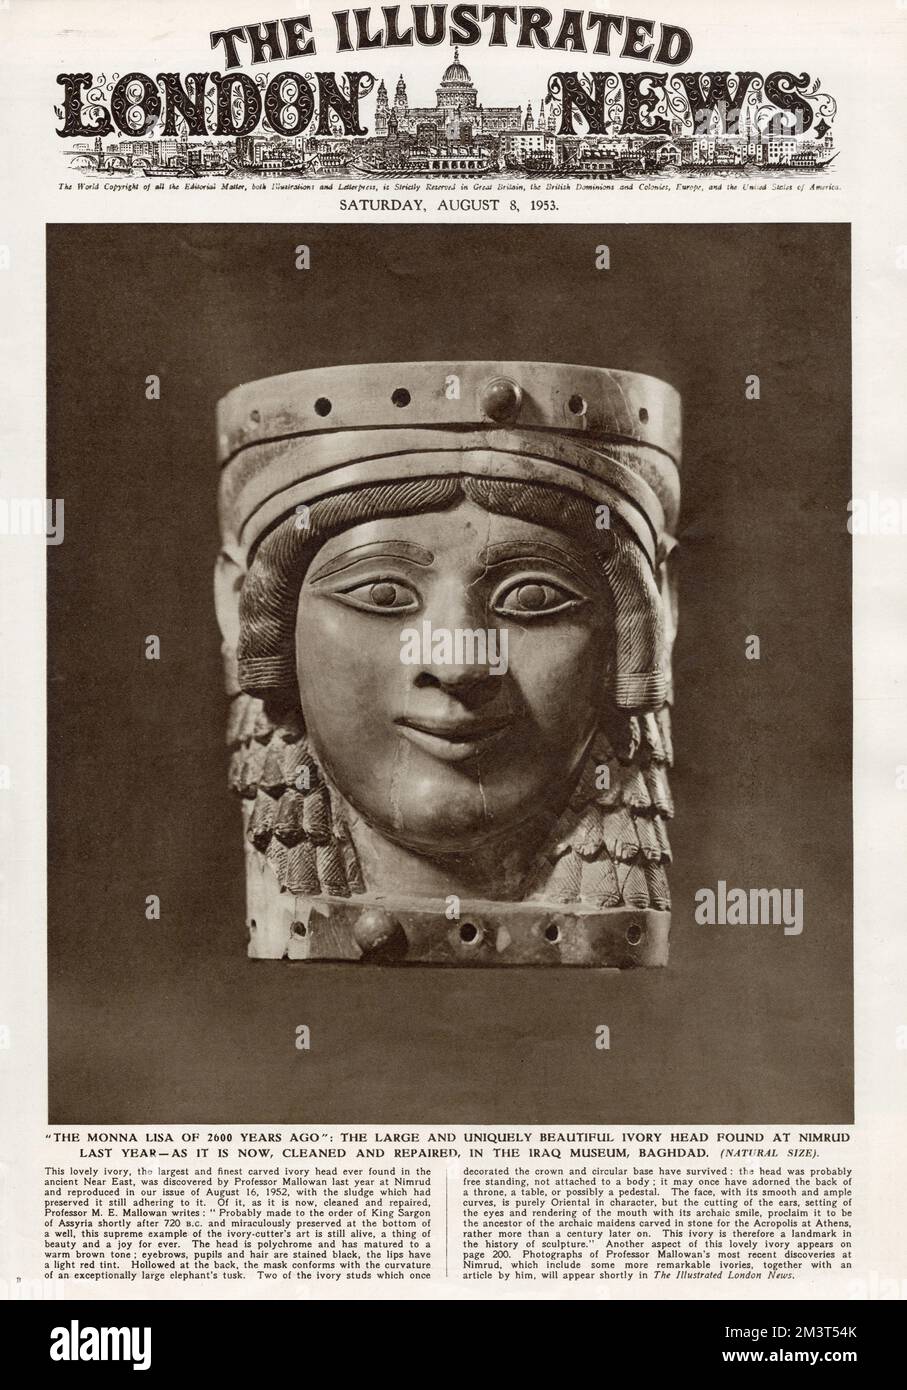 The large and beautiful ivory head found at Nimrud by Professor Mallowan in 1952, how cleaned and repaired, in the Iraq Museum, Baghdad. Front cover of The Illustrated London News, 8th August 1953. Stock Photo